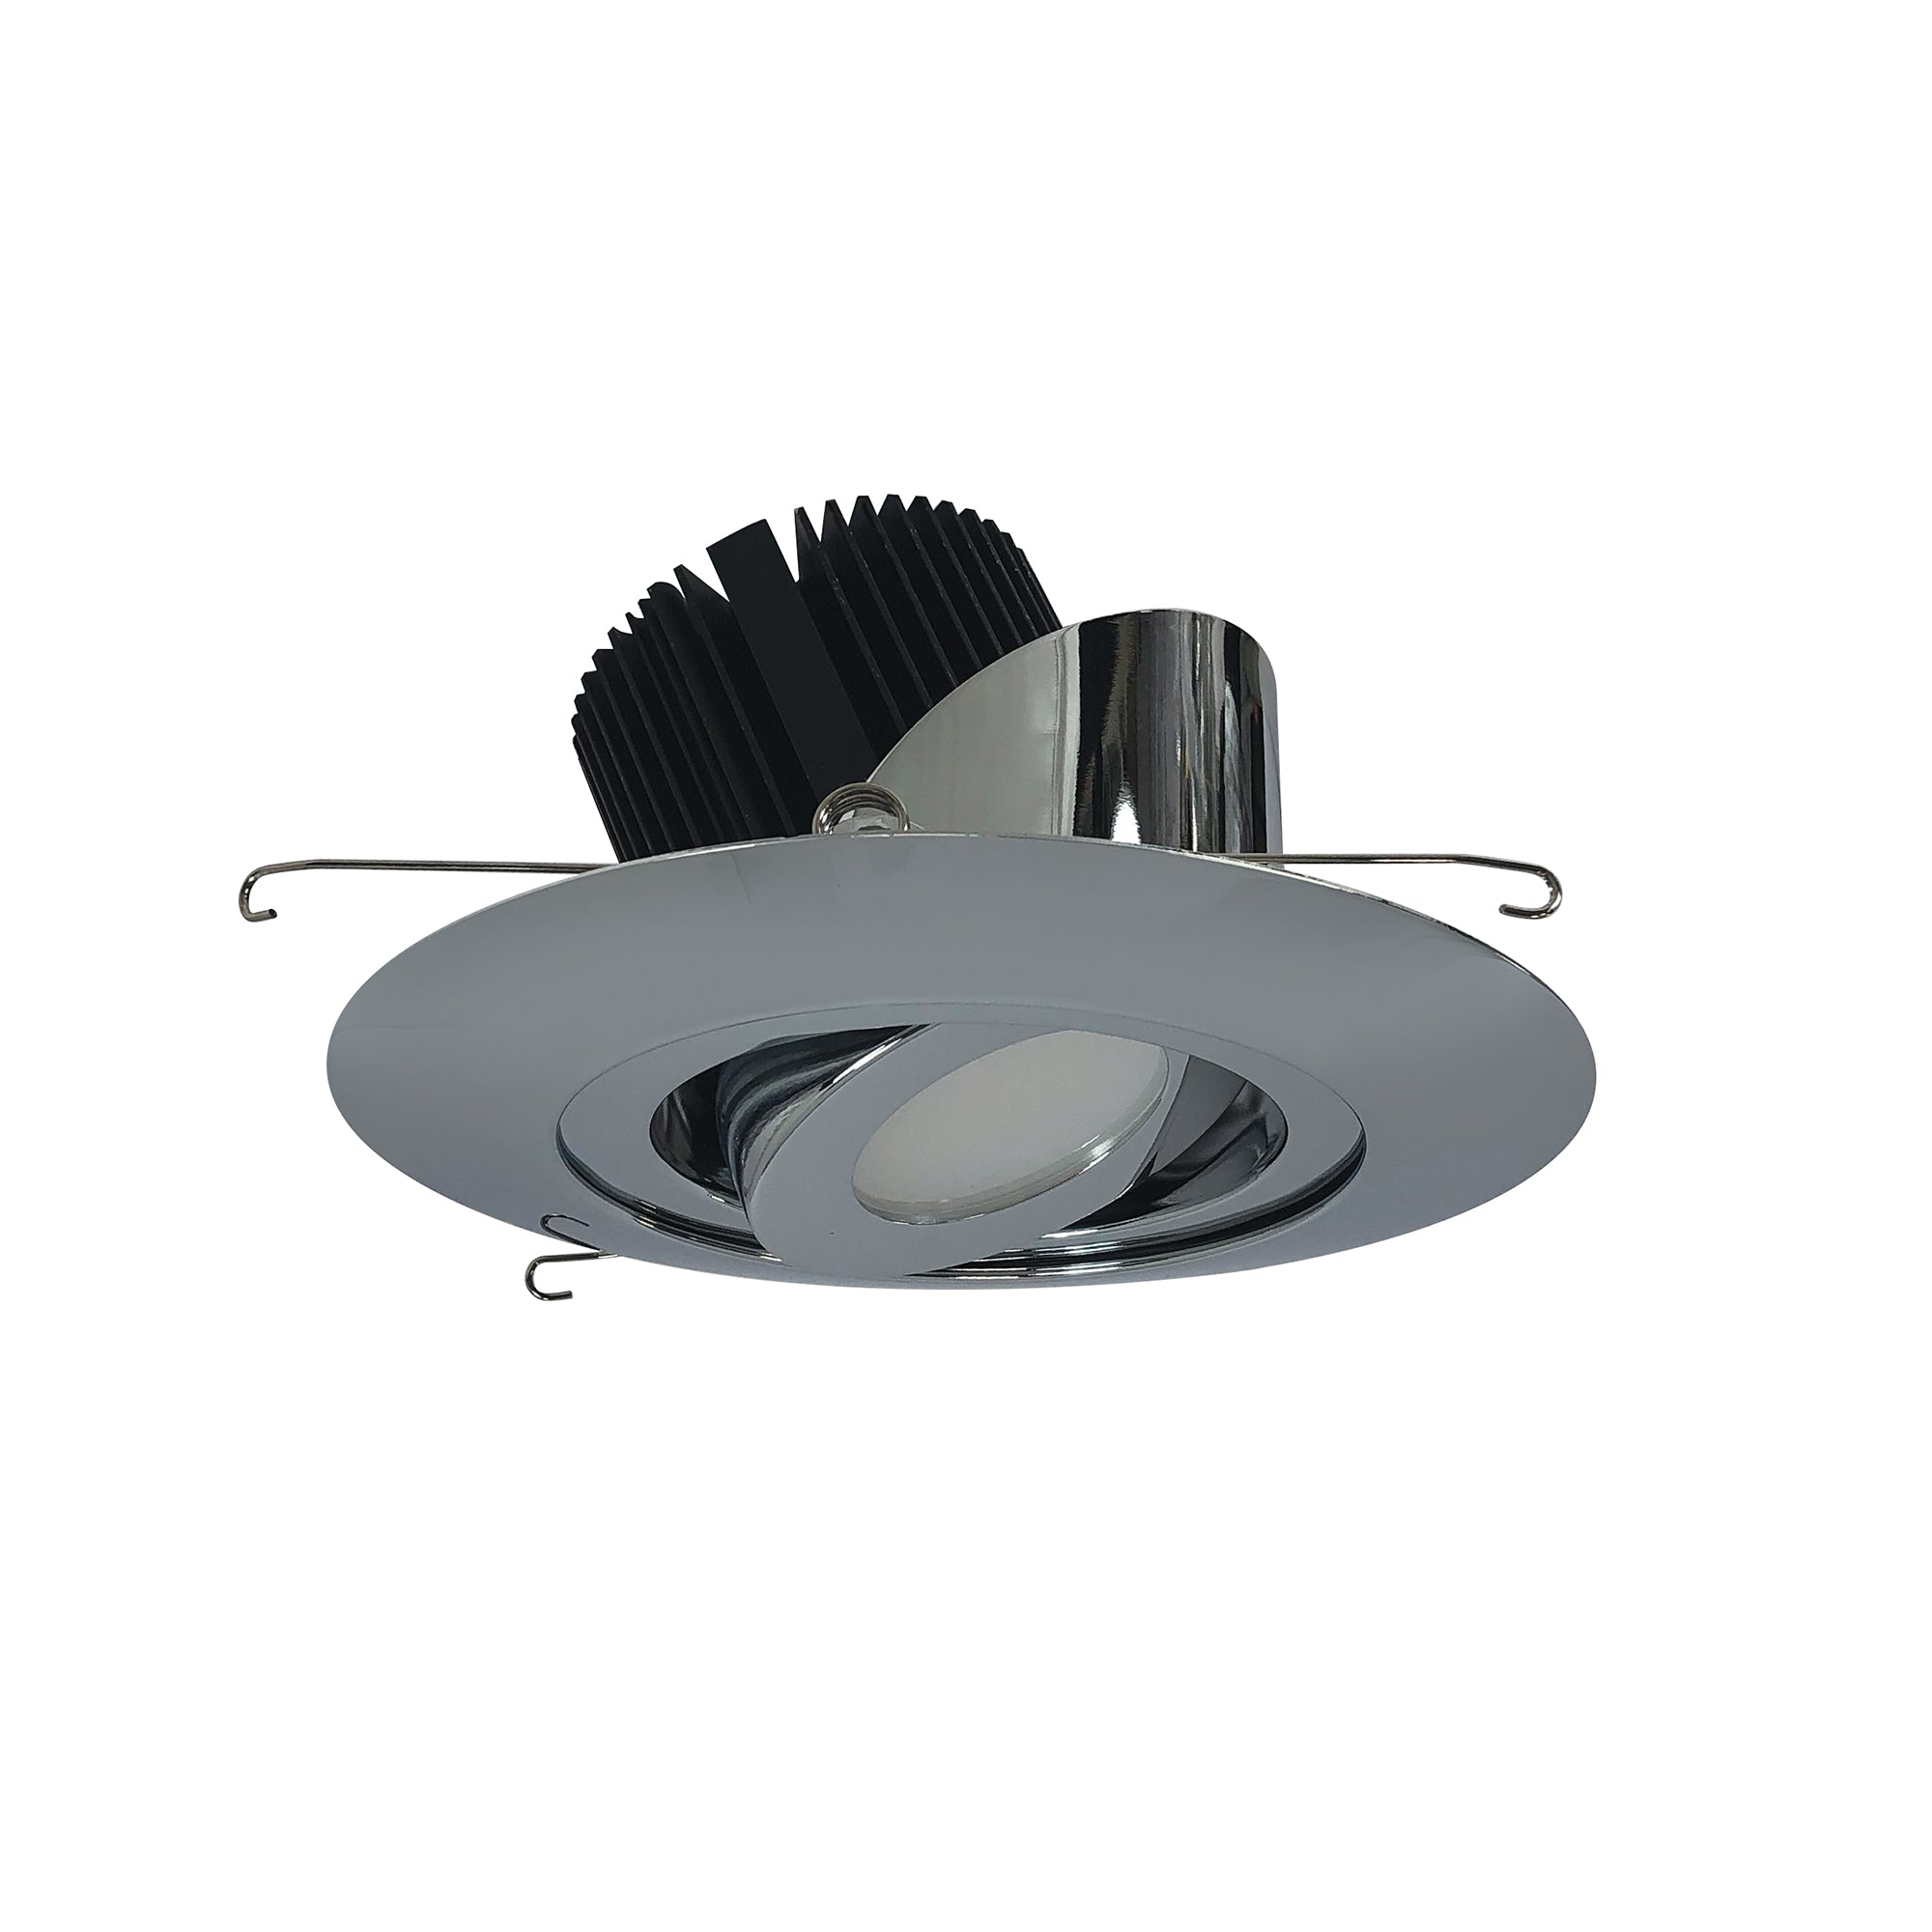 Nora Lighting NRM2-614L2527FC - Recessed - 6 Inch Marquise II Round Surface Adjustable Trim, Flood, 2500lm, 2700K, Chrome (Not Compatible with NHRM2-625 Housings)